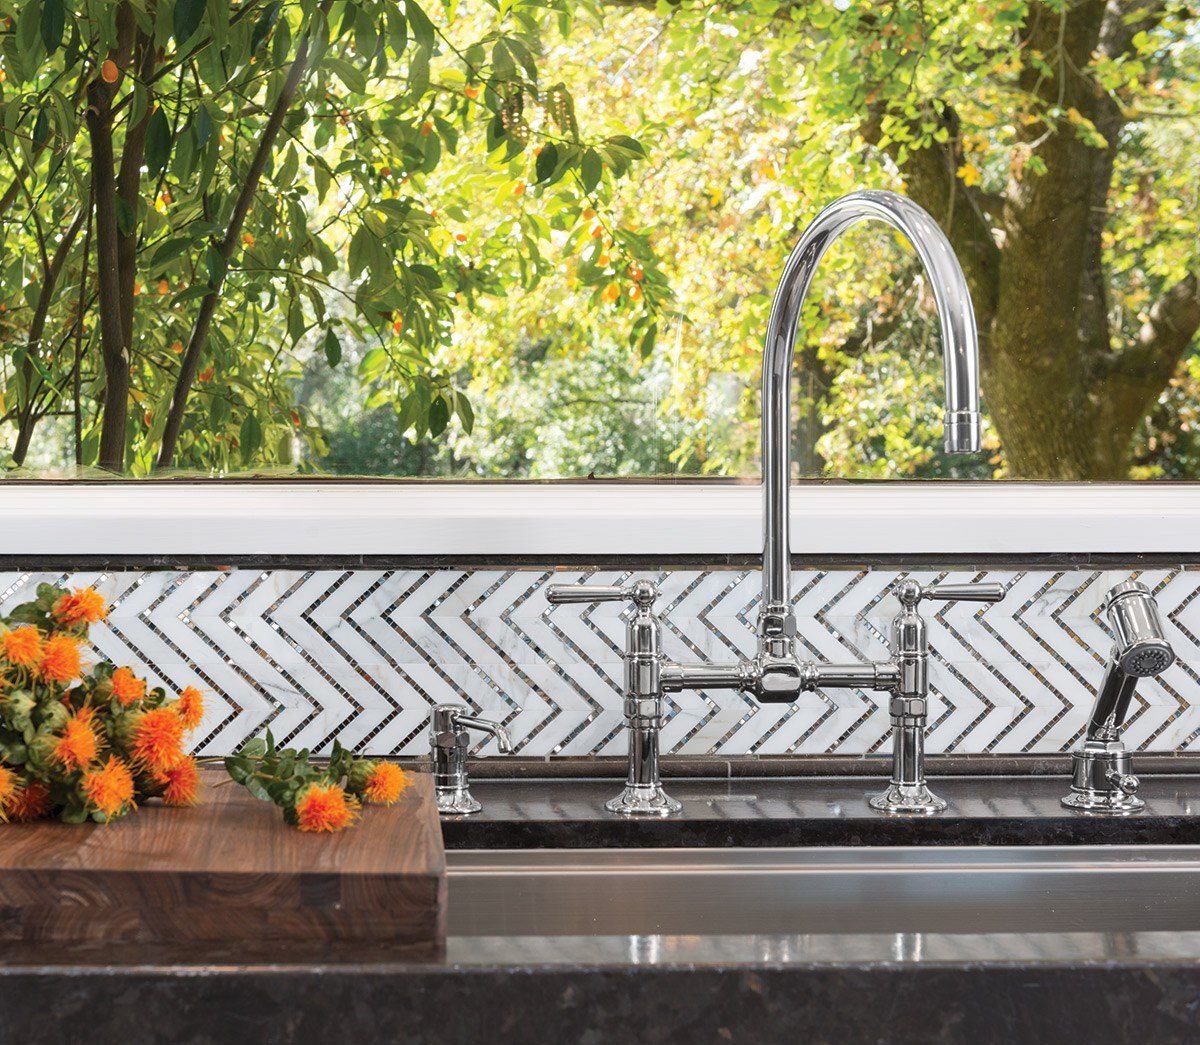 AKDO's Allure Collection made its debut in the Traditional Home Napa Show House kitchen.